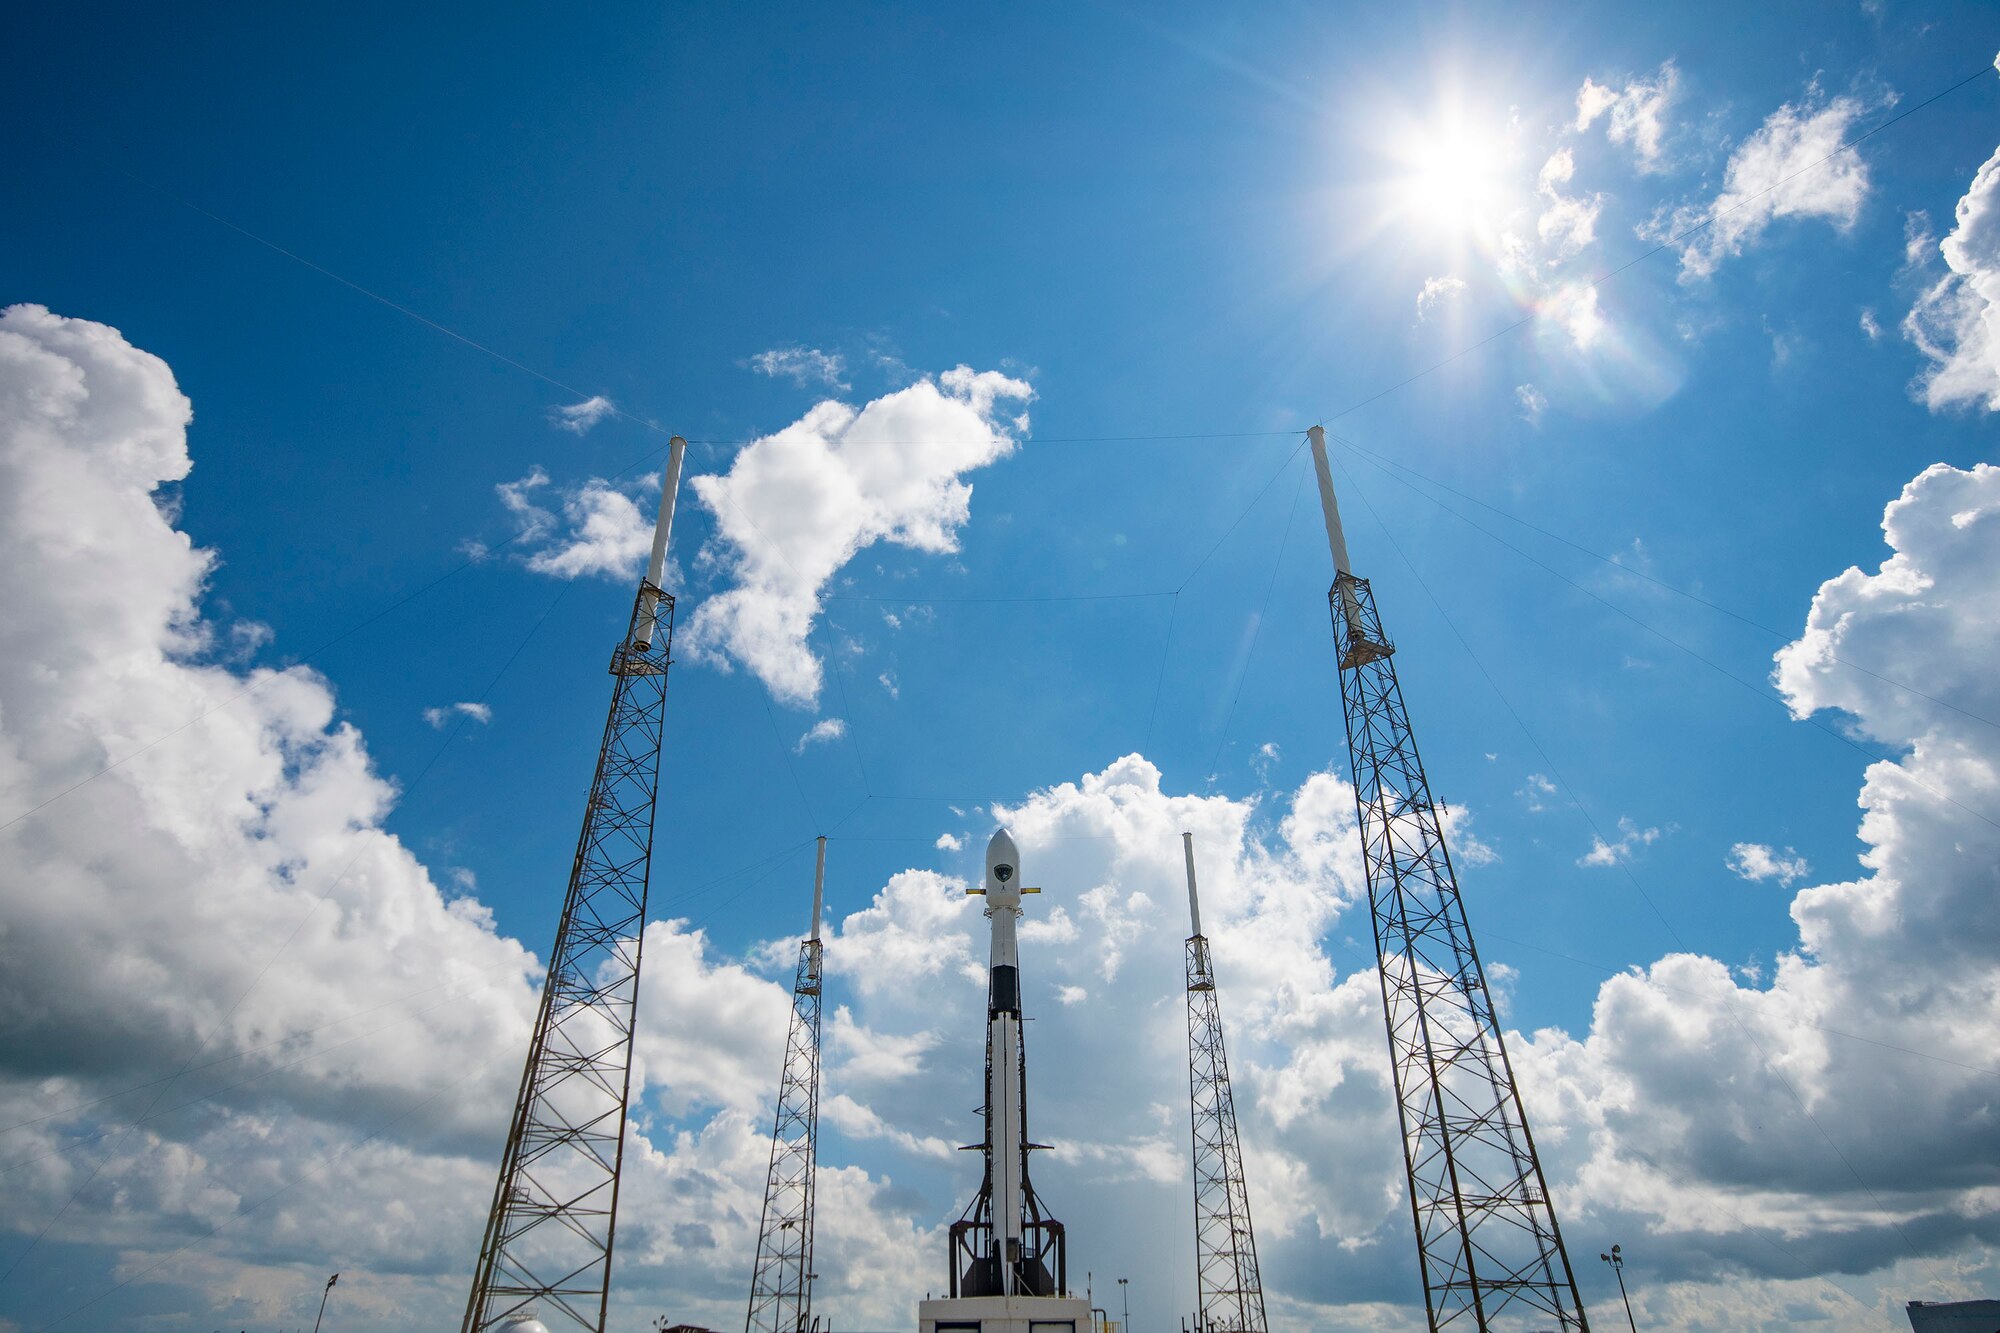 A Falcon 9 with GPS III SV 04 encapsulated inside the payload fairing the stands vertical on the pad at Cape Canaveral’s Space Launch Complex 40 in preparation for its Sept. 30 launch. The satellite will augment the current GPS constellation comprised of 31 operational spacecraft in Medium Earth Orbit (MEO). (Photo courtesy of SpaceX)